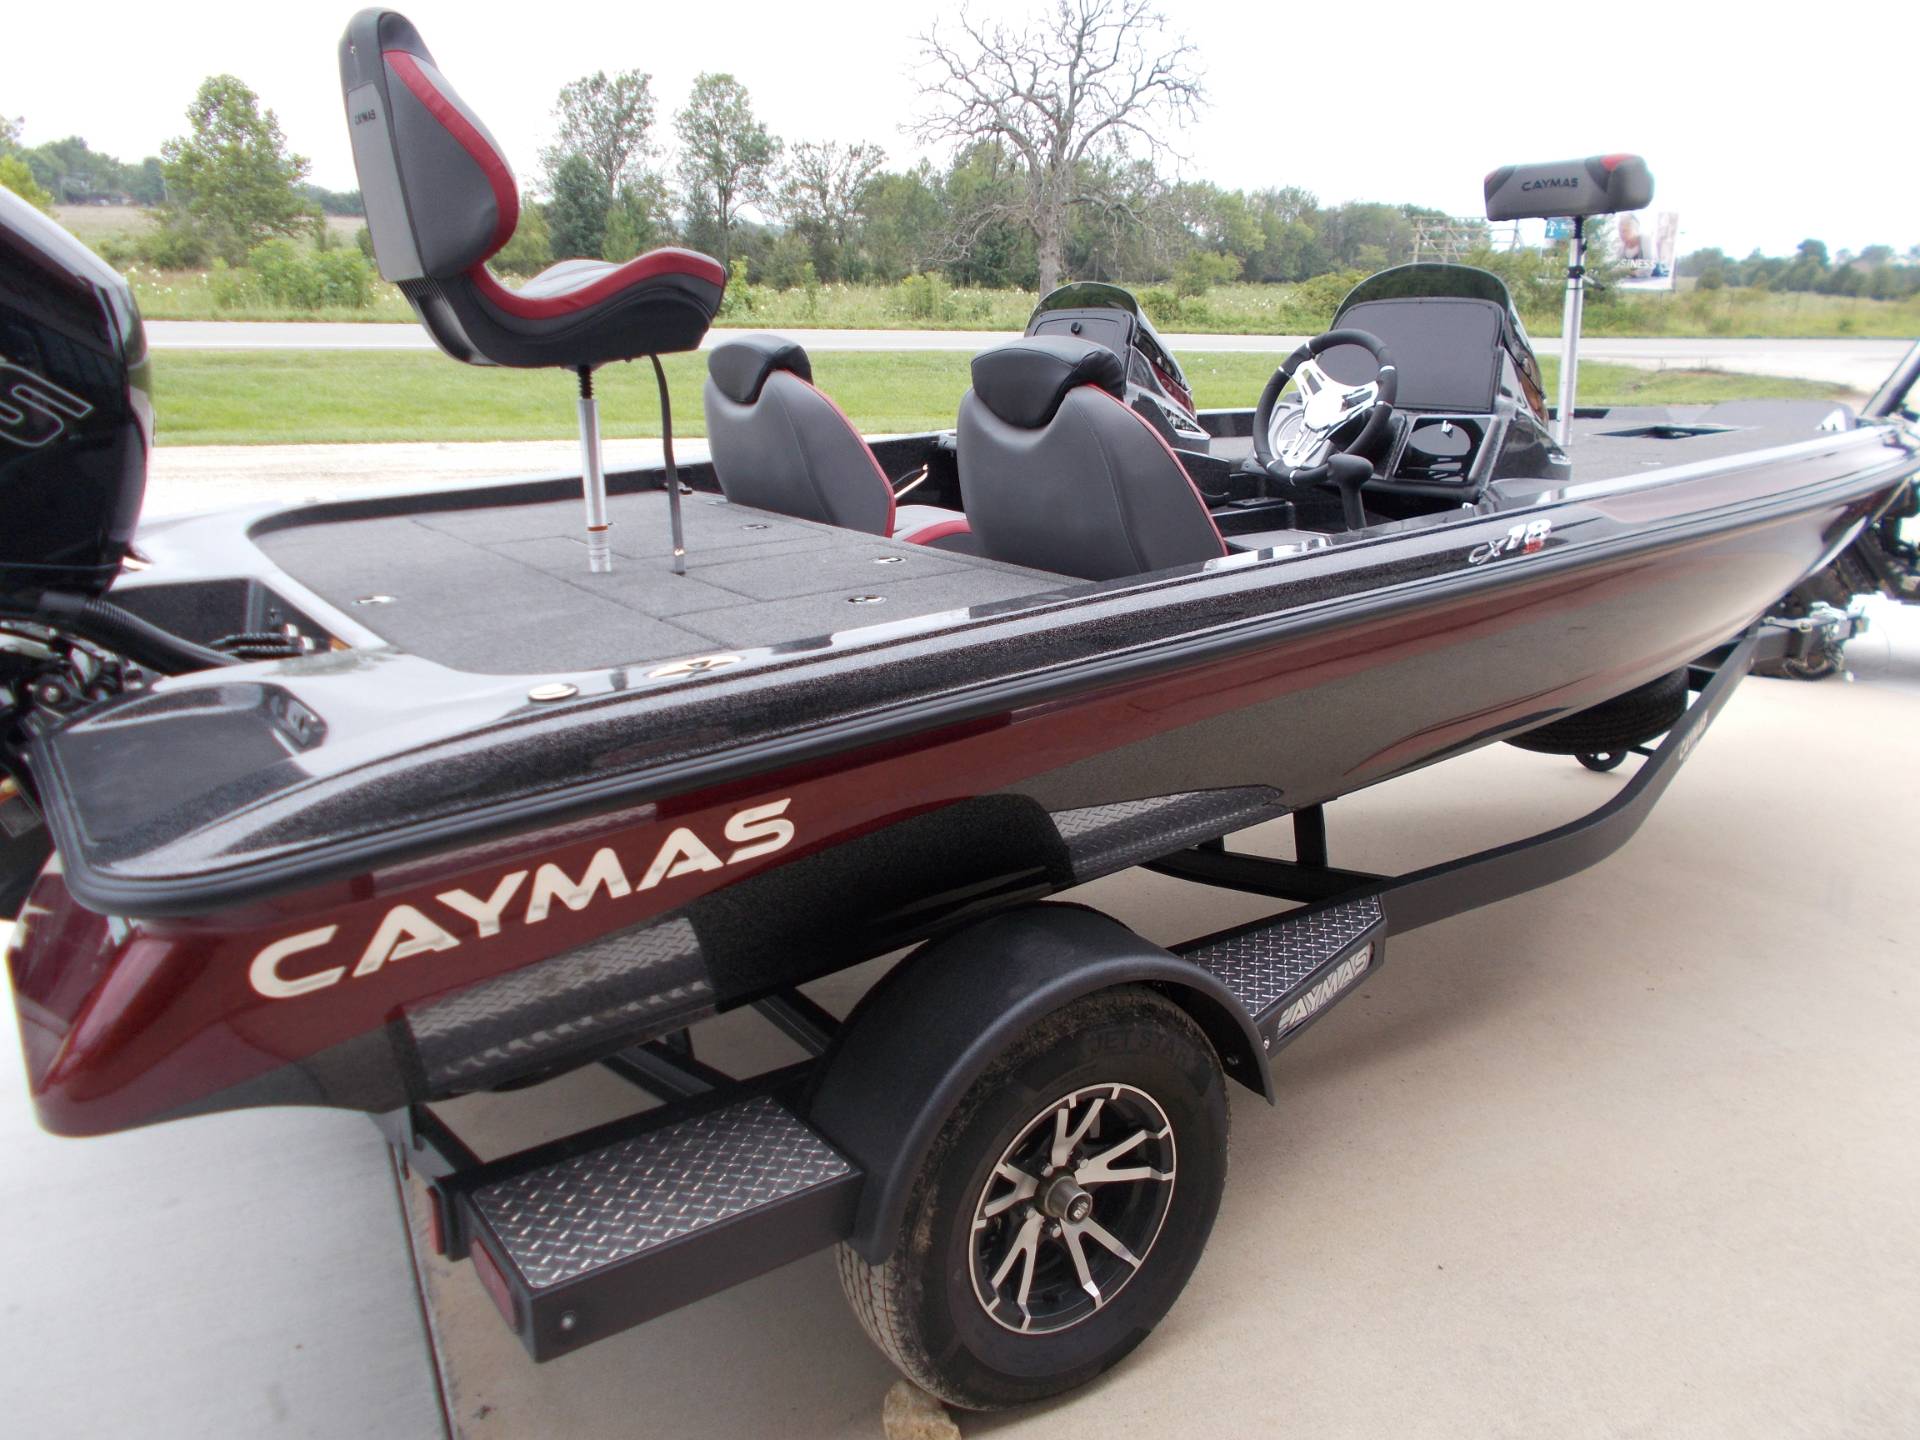 New 21 Caymas Cx 18 Ss W Mercury 150 Pro Xs Trailer Power Boats Outboard In West Plains Mo Stock Number 2514